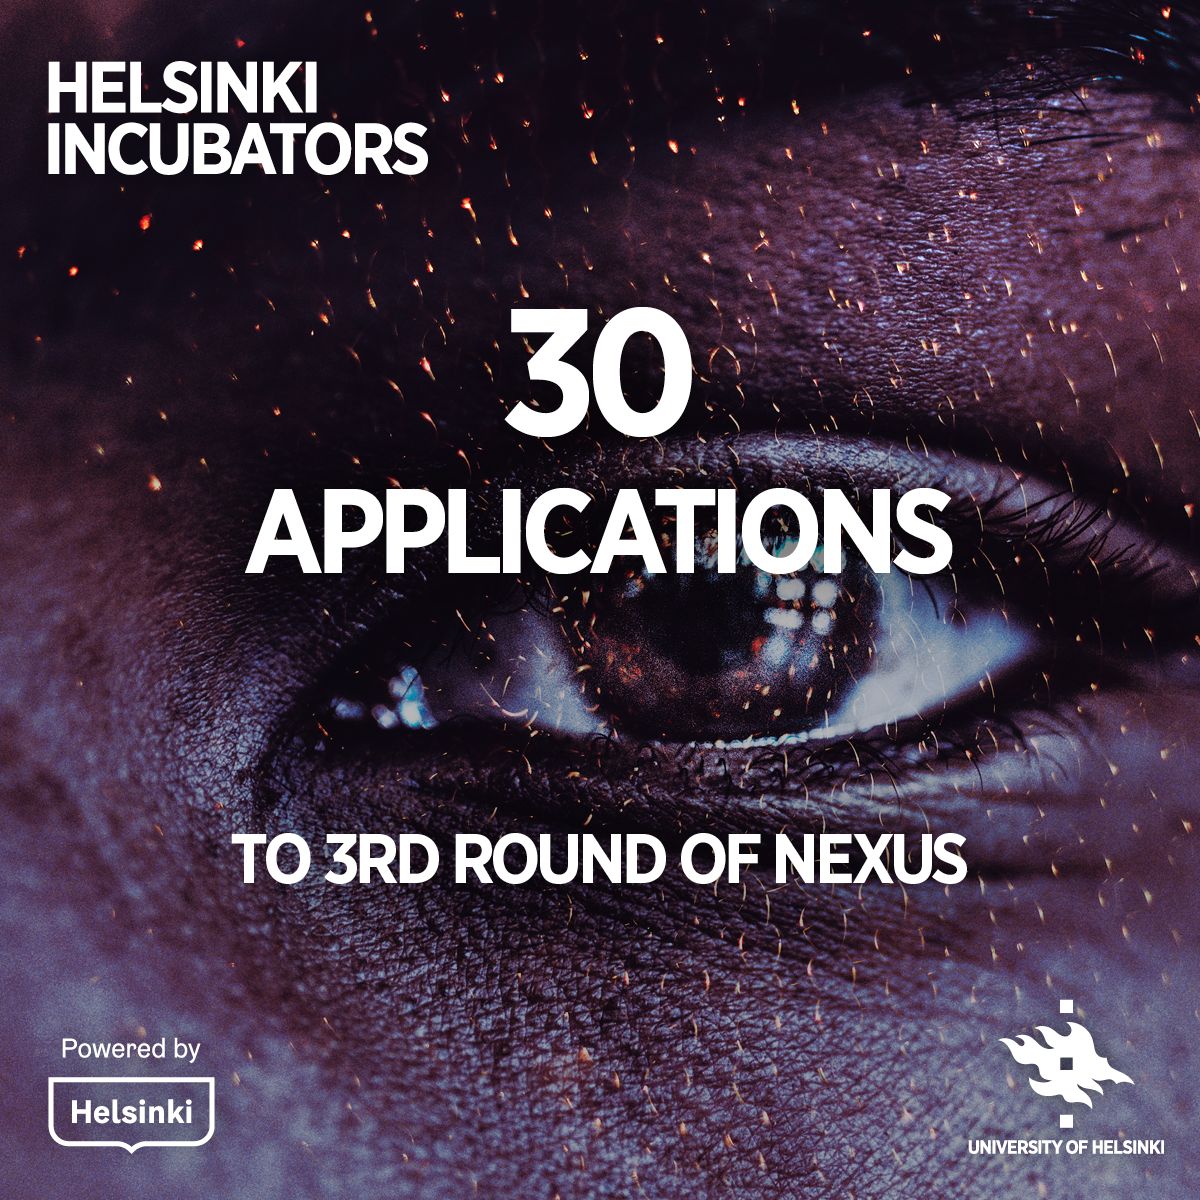 Wow! We received a whopping 30 applications to our @helsinkiuni NEXUS incubator for crystallised solutions in #DeepTech #AI & #sustainability! Can't wait to interview & meet all of them. 🤩 Make sure to tune in again in May & see what the new cohort looks like!